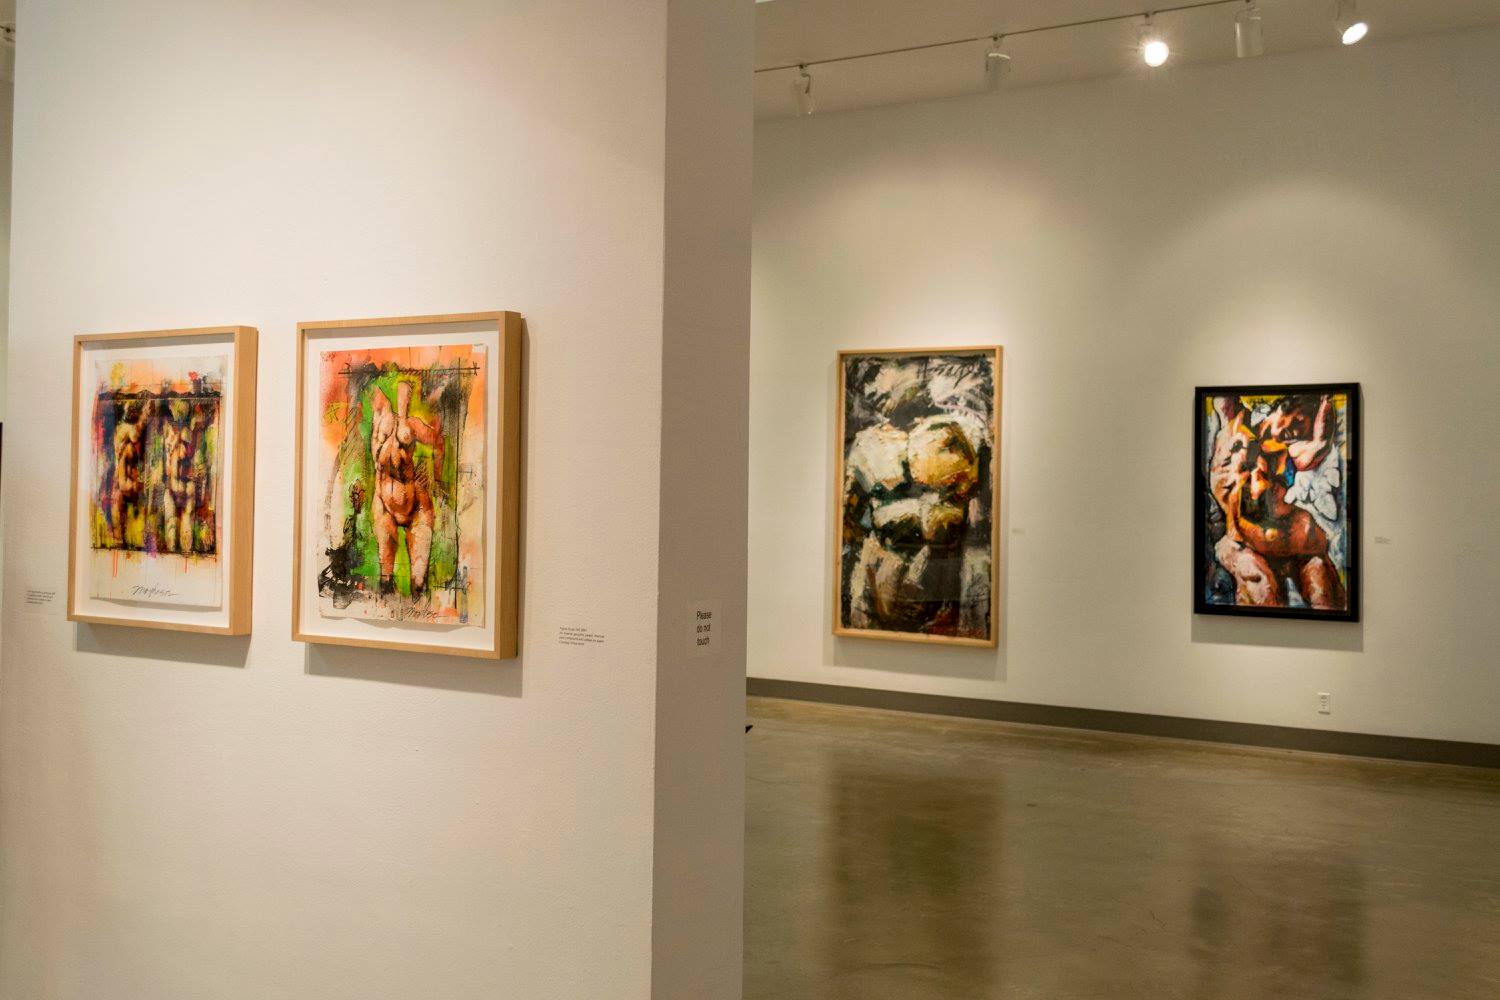 Corridor of gallery, Exhibition: Jim Morphesis: Passion and Presence, Memento and Myth, Nov 18, 2017 - Feb 1, 2018, Curator: Michele Cairella Fillmore, W. Keith & Janet Kellogg Art Gallery, Cal Poly Pomona. [Panoramic of the South gallery]